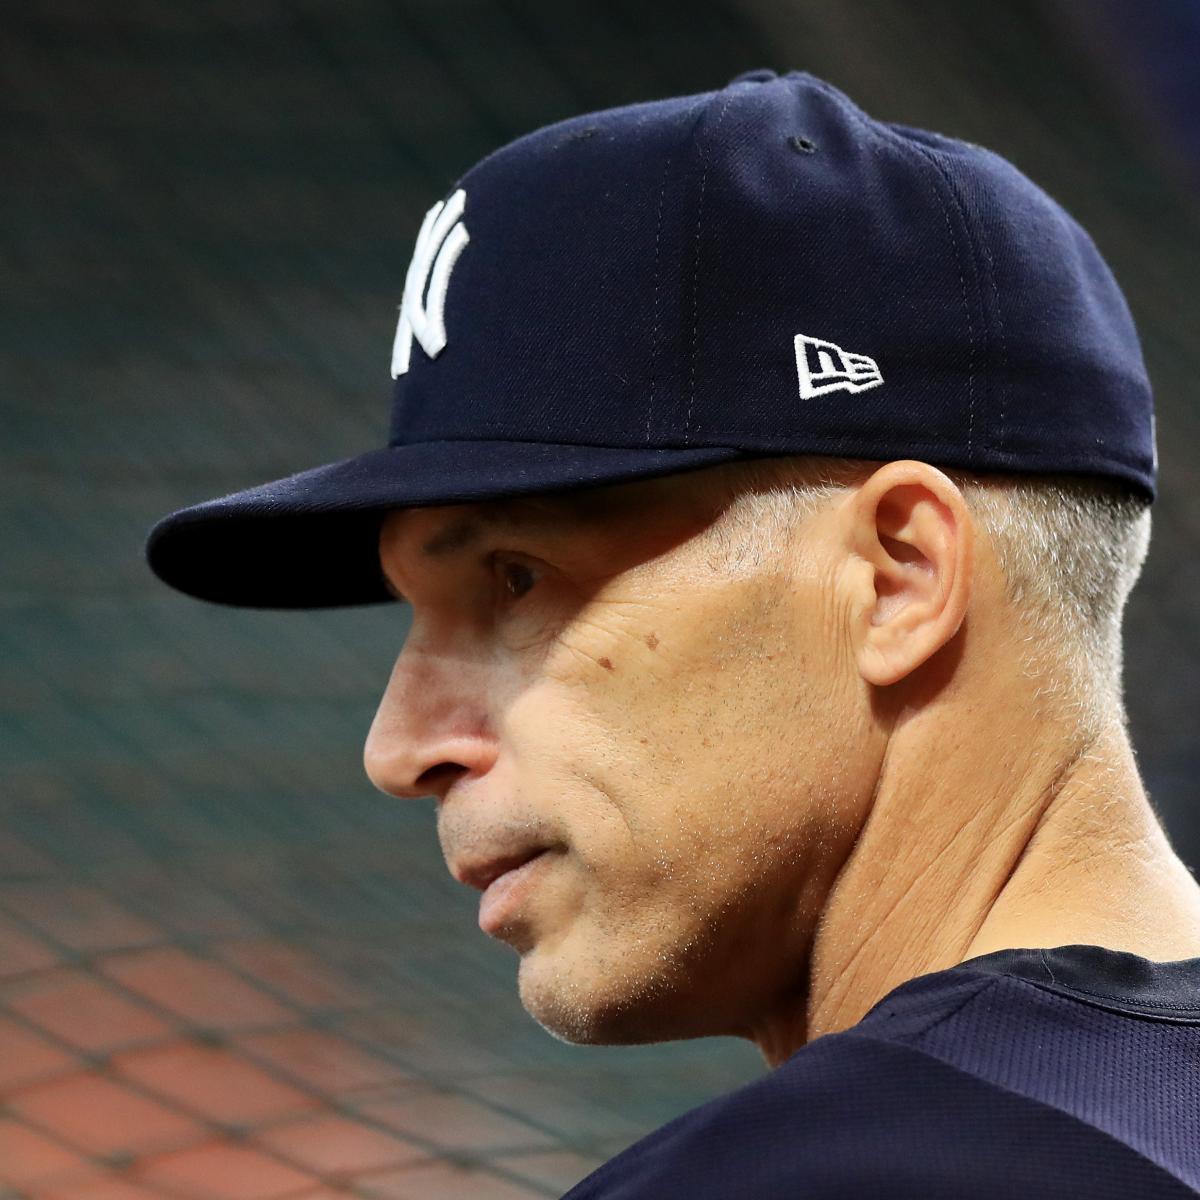 Yankees bench coach Rob Thomson 1st to interview for manager